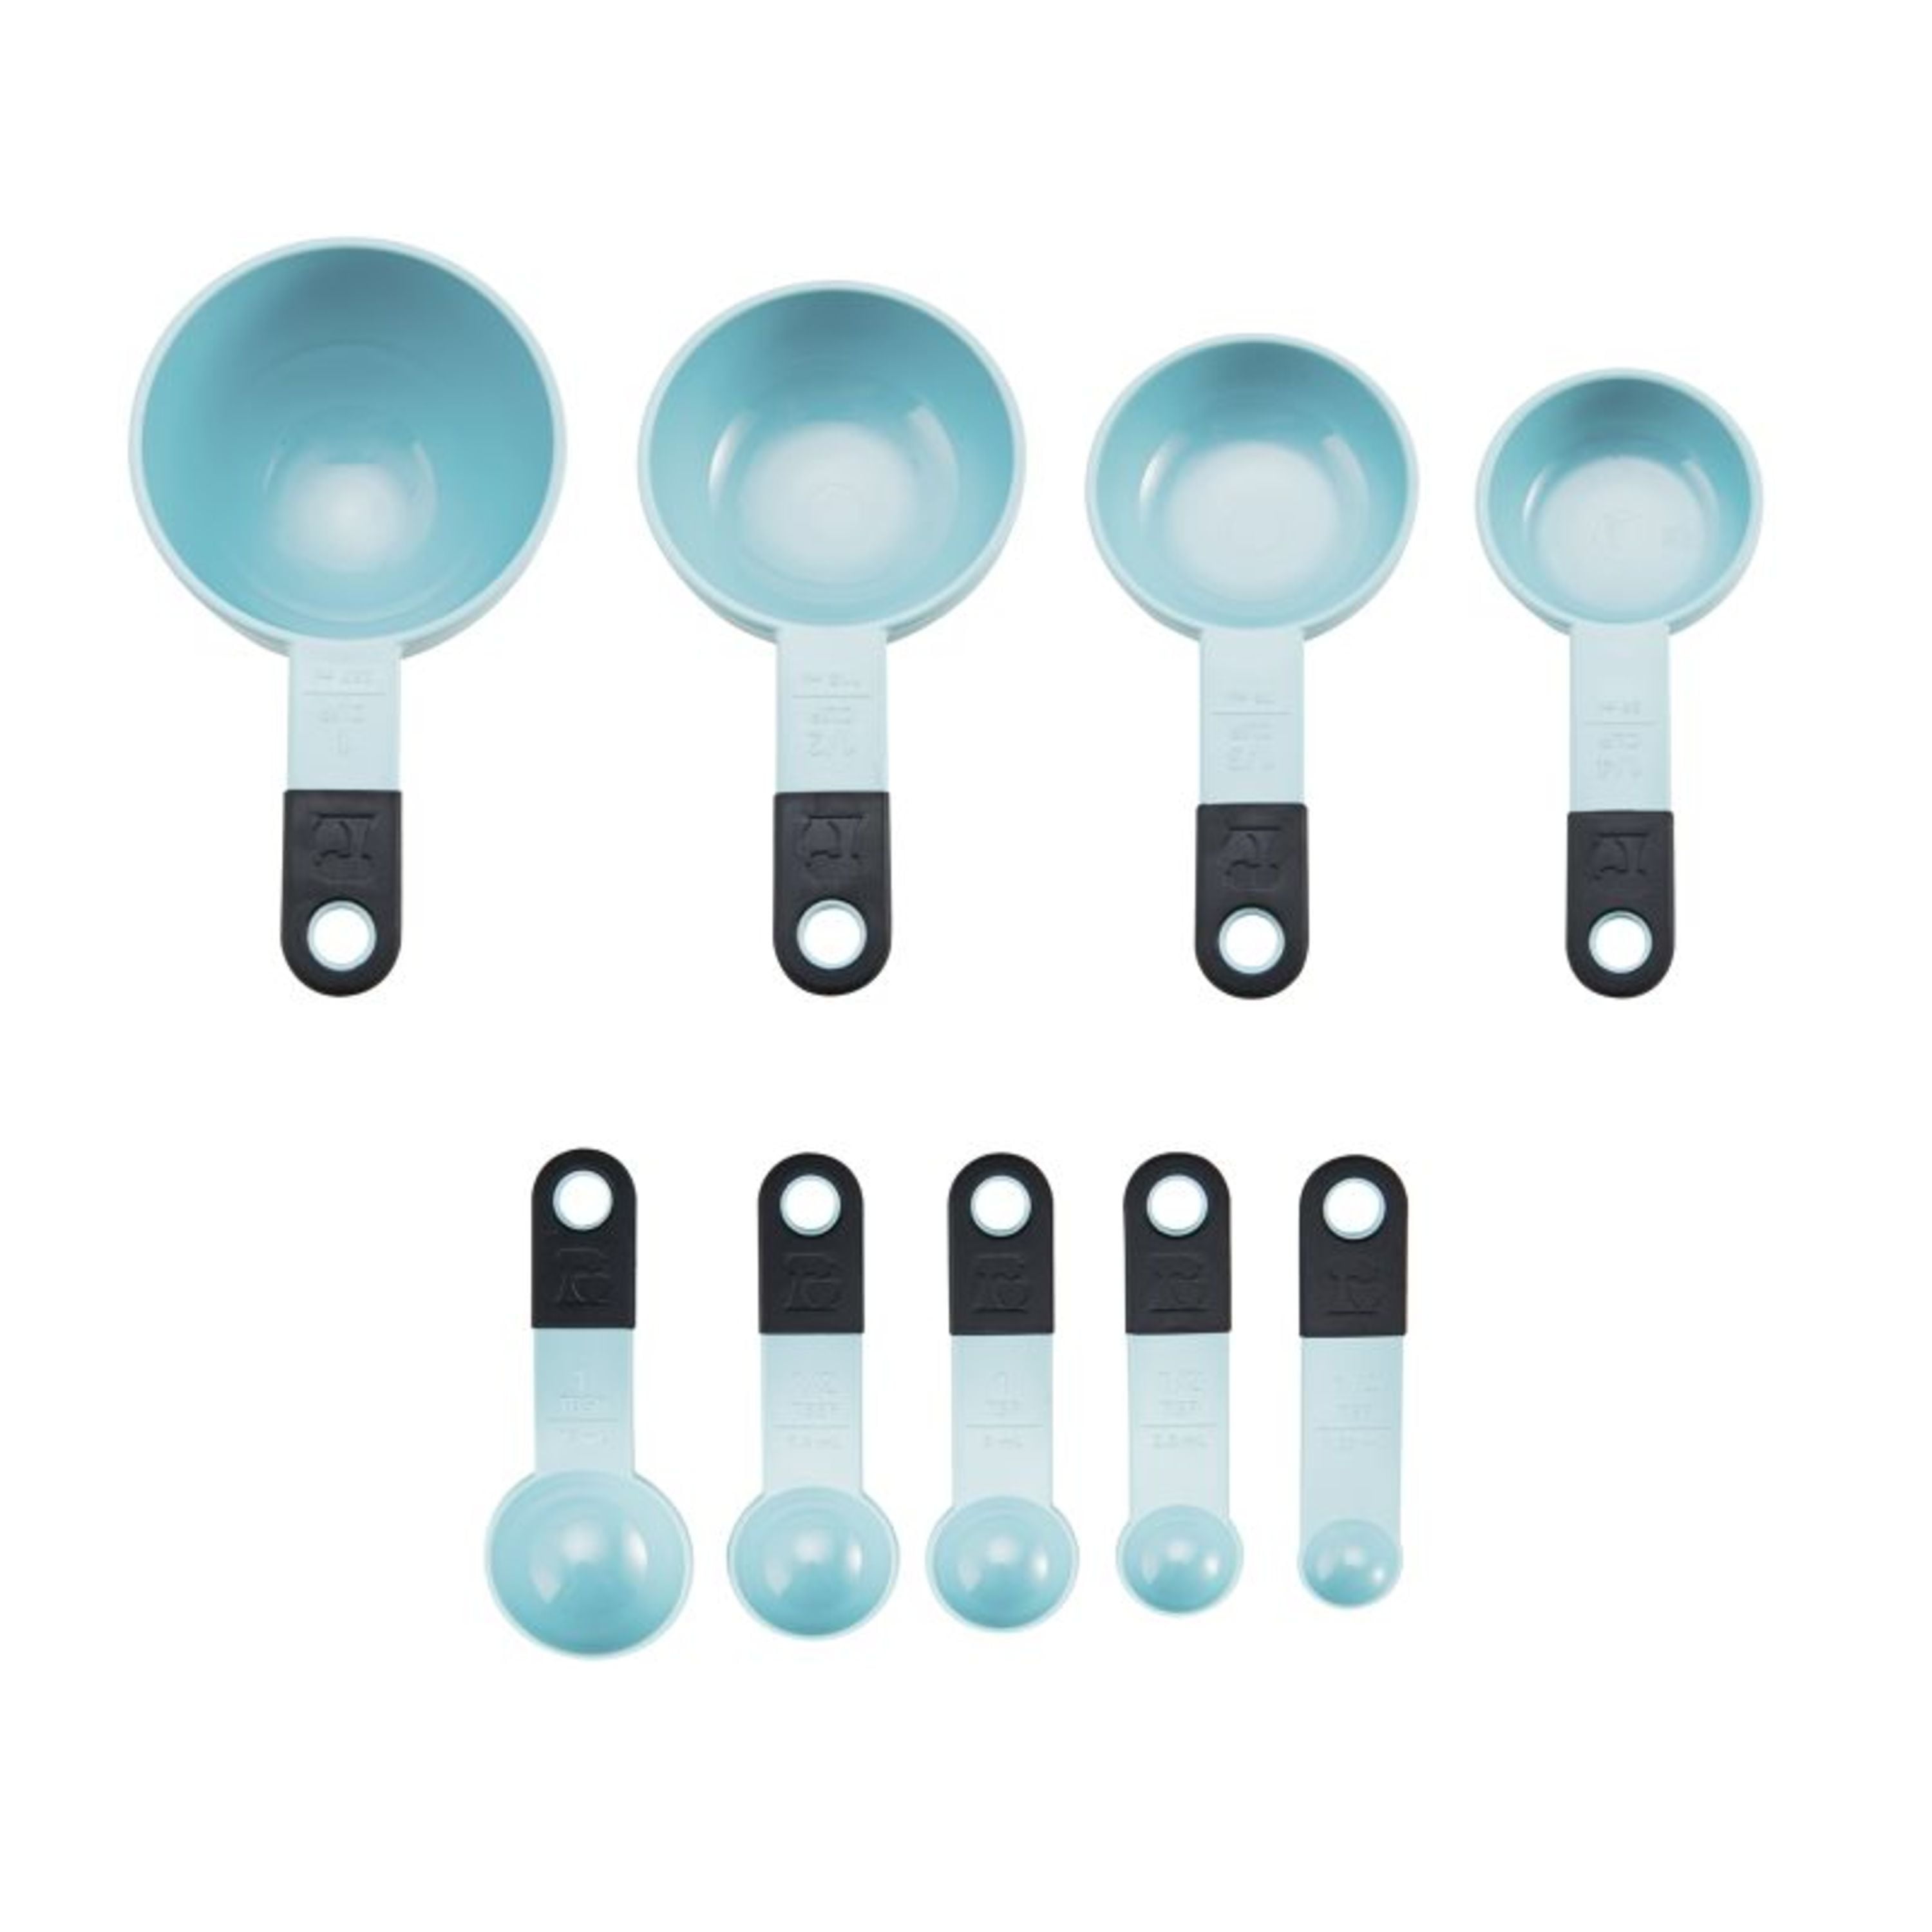 Blue Measuring Cups And Spoons Set 9pc Dishwasher Safe Durable FREE SHIPPING